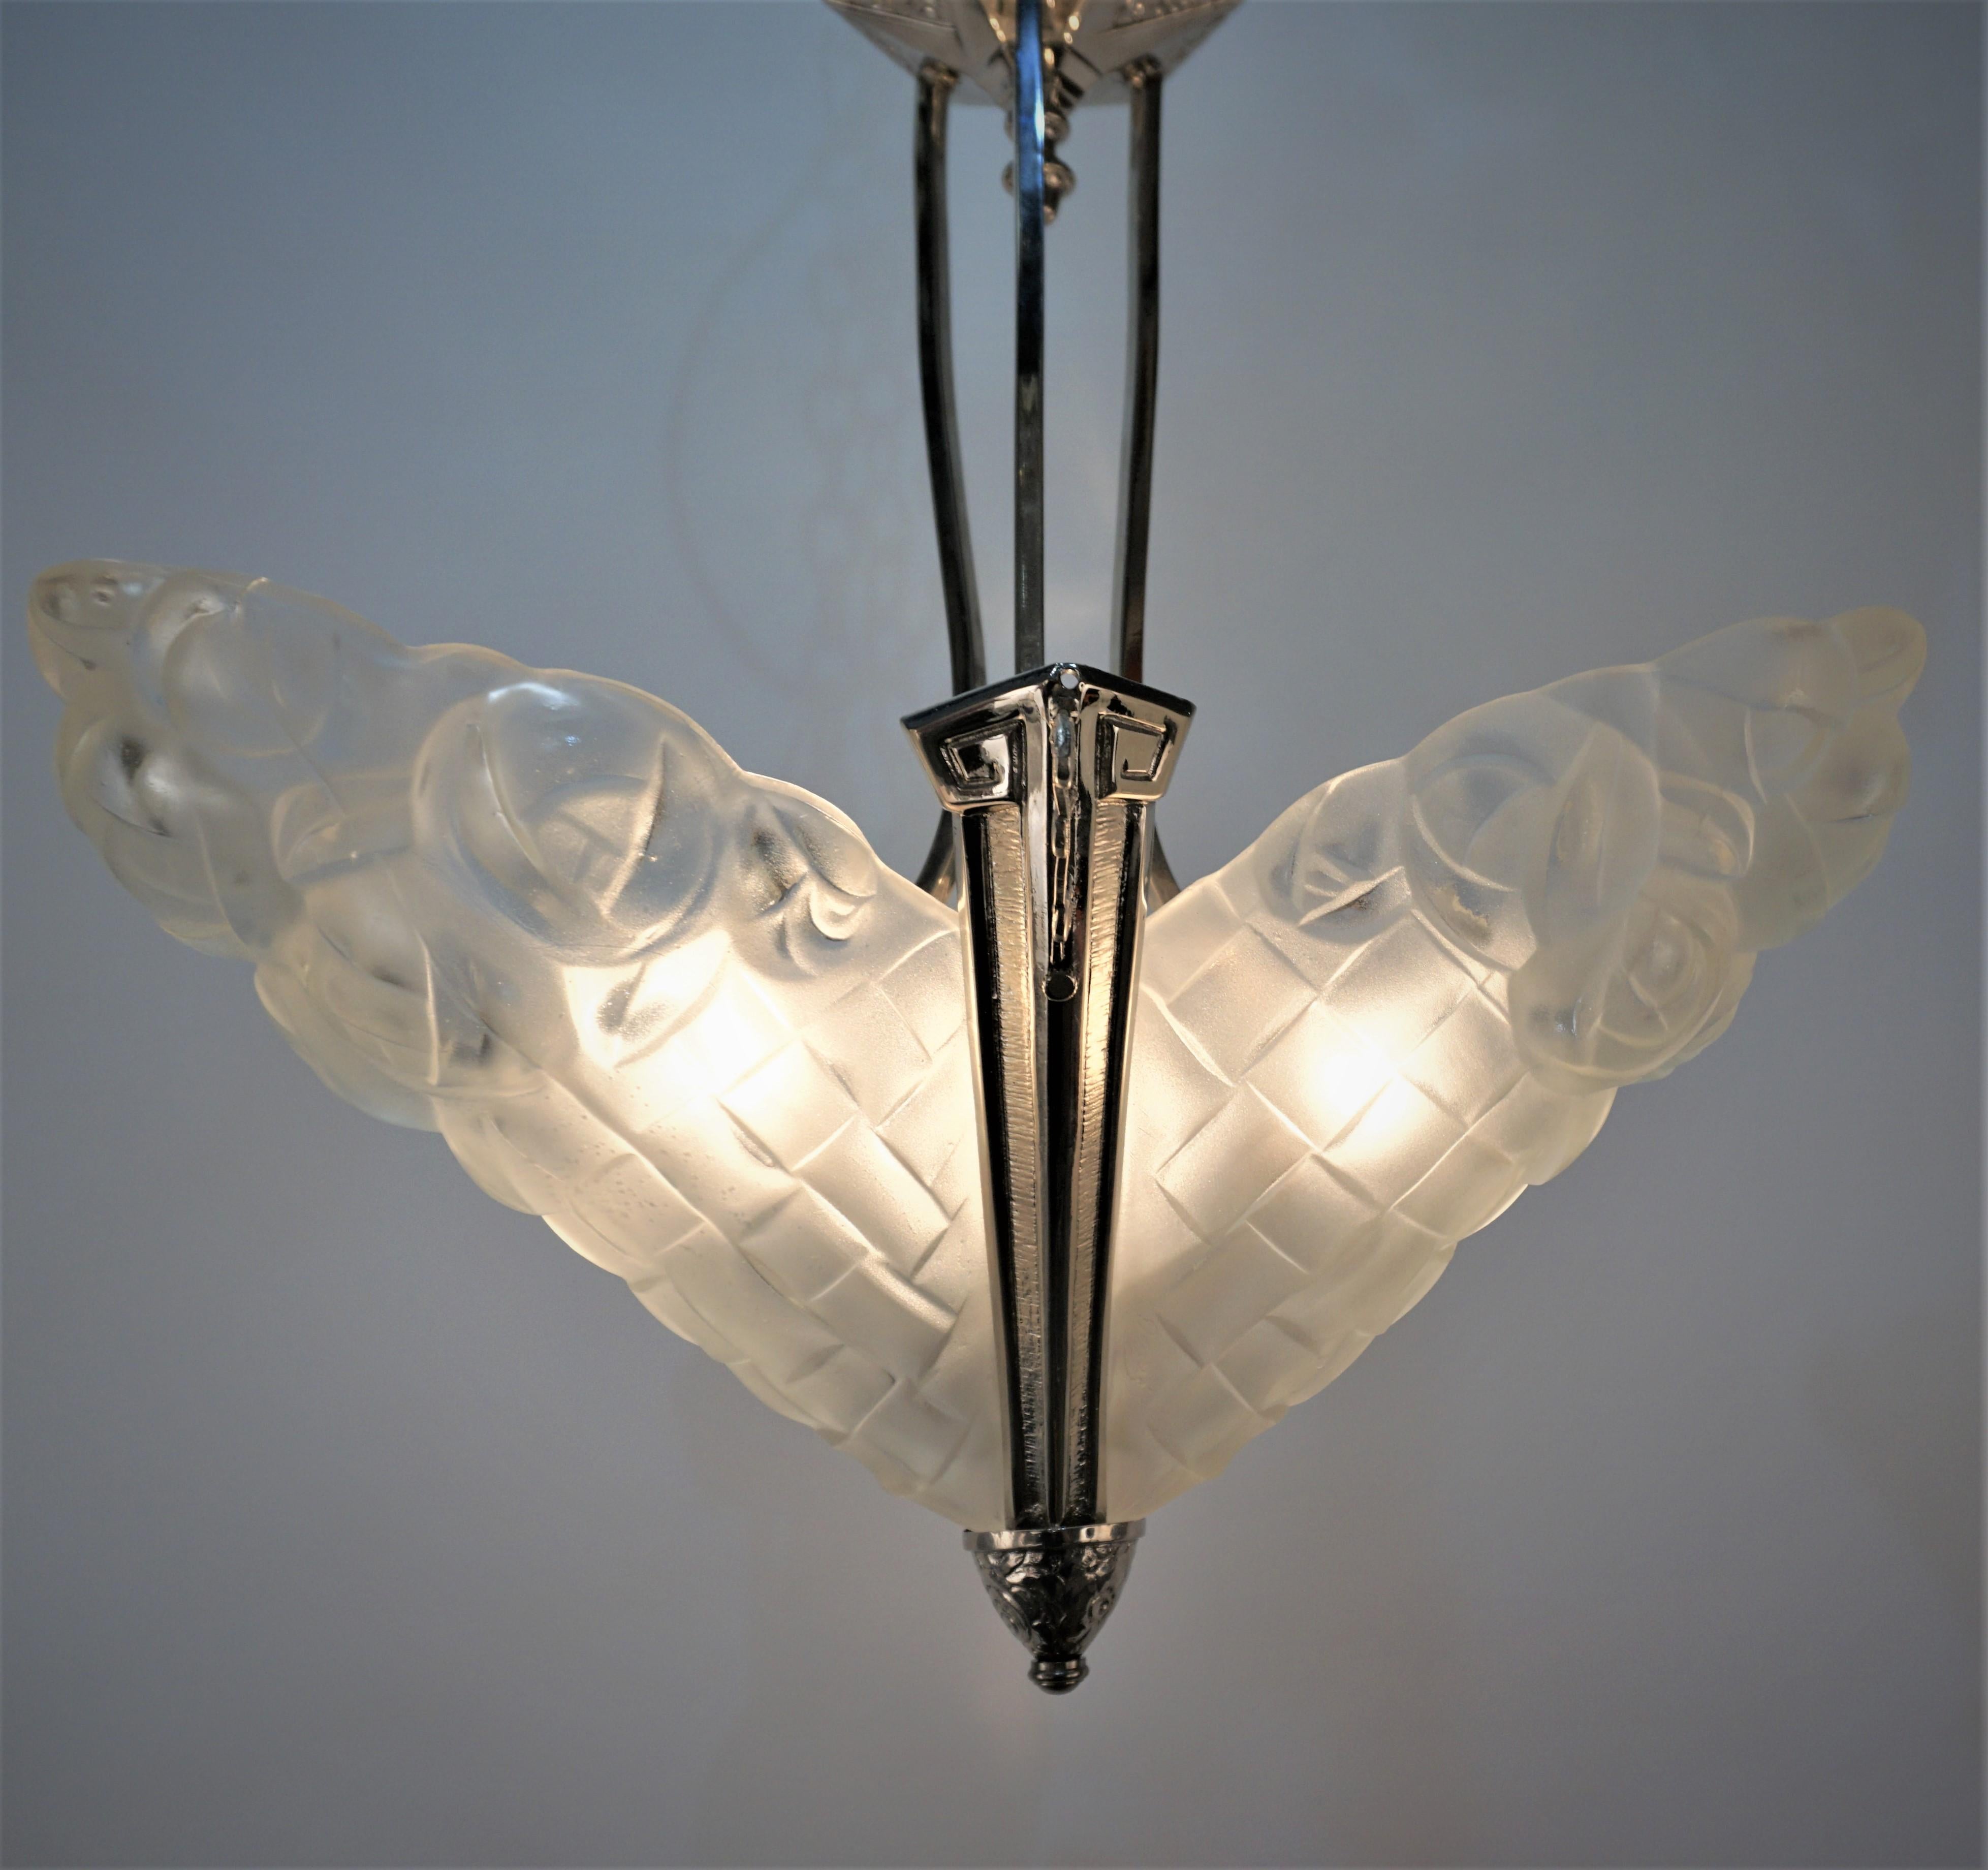 Clear frost glass with elegant nickel on bronze frame c1930's French art deco chandelier by Degue.
Professionally rewired and ready for installation.
Three lights 100 max each.